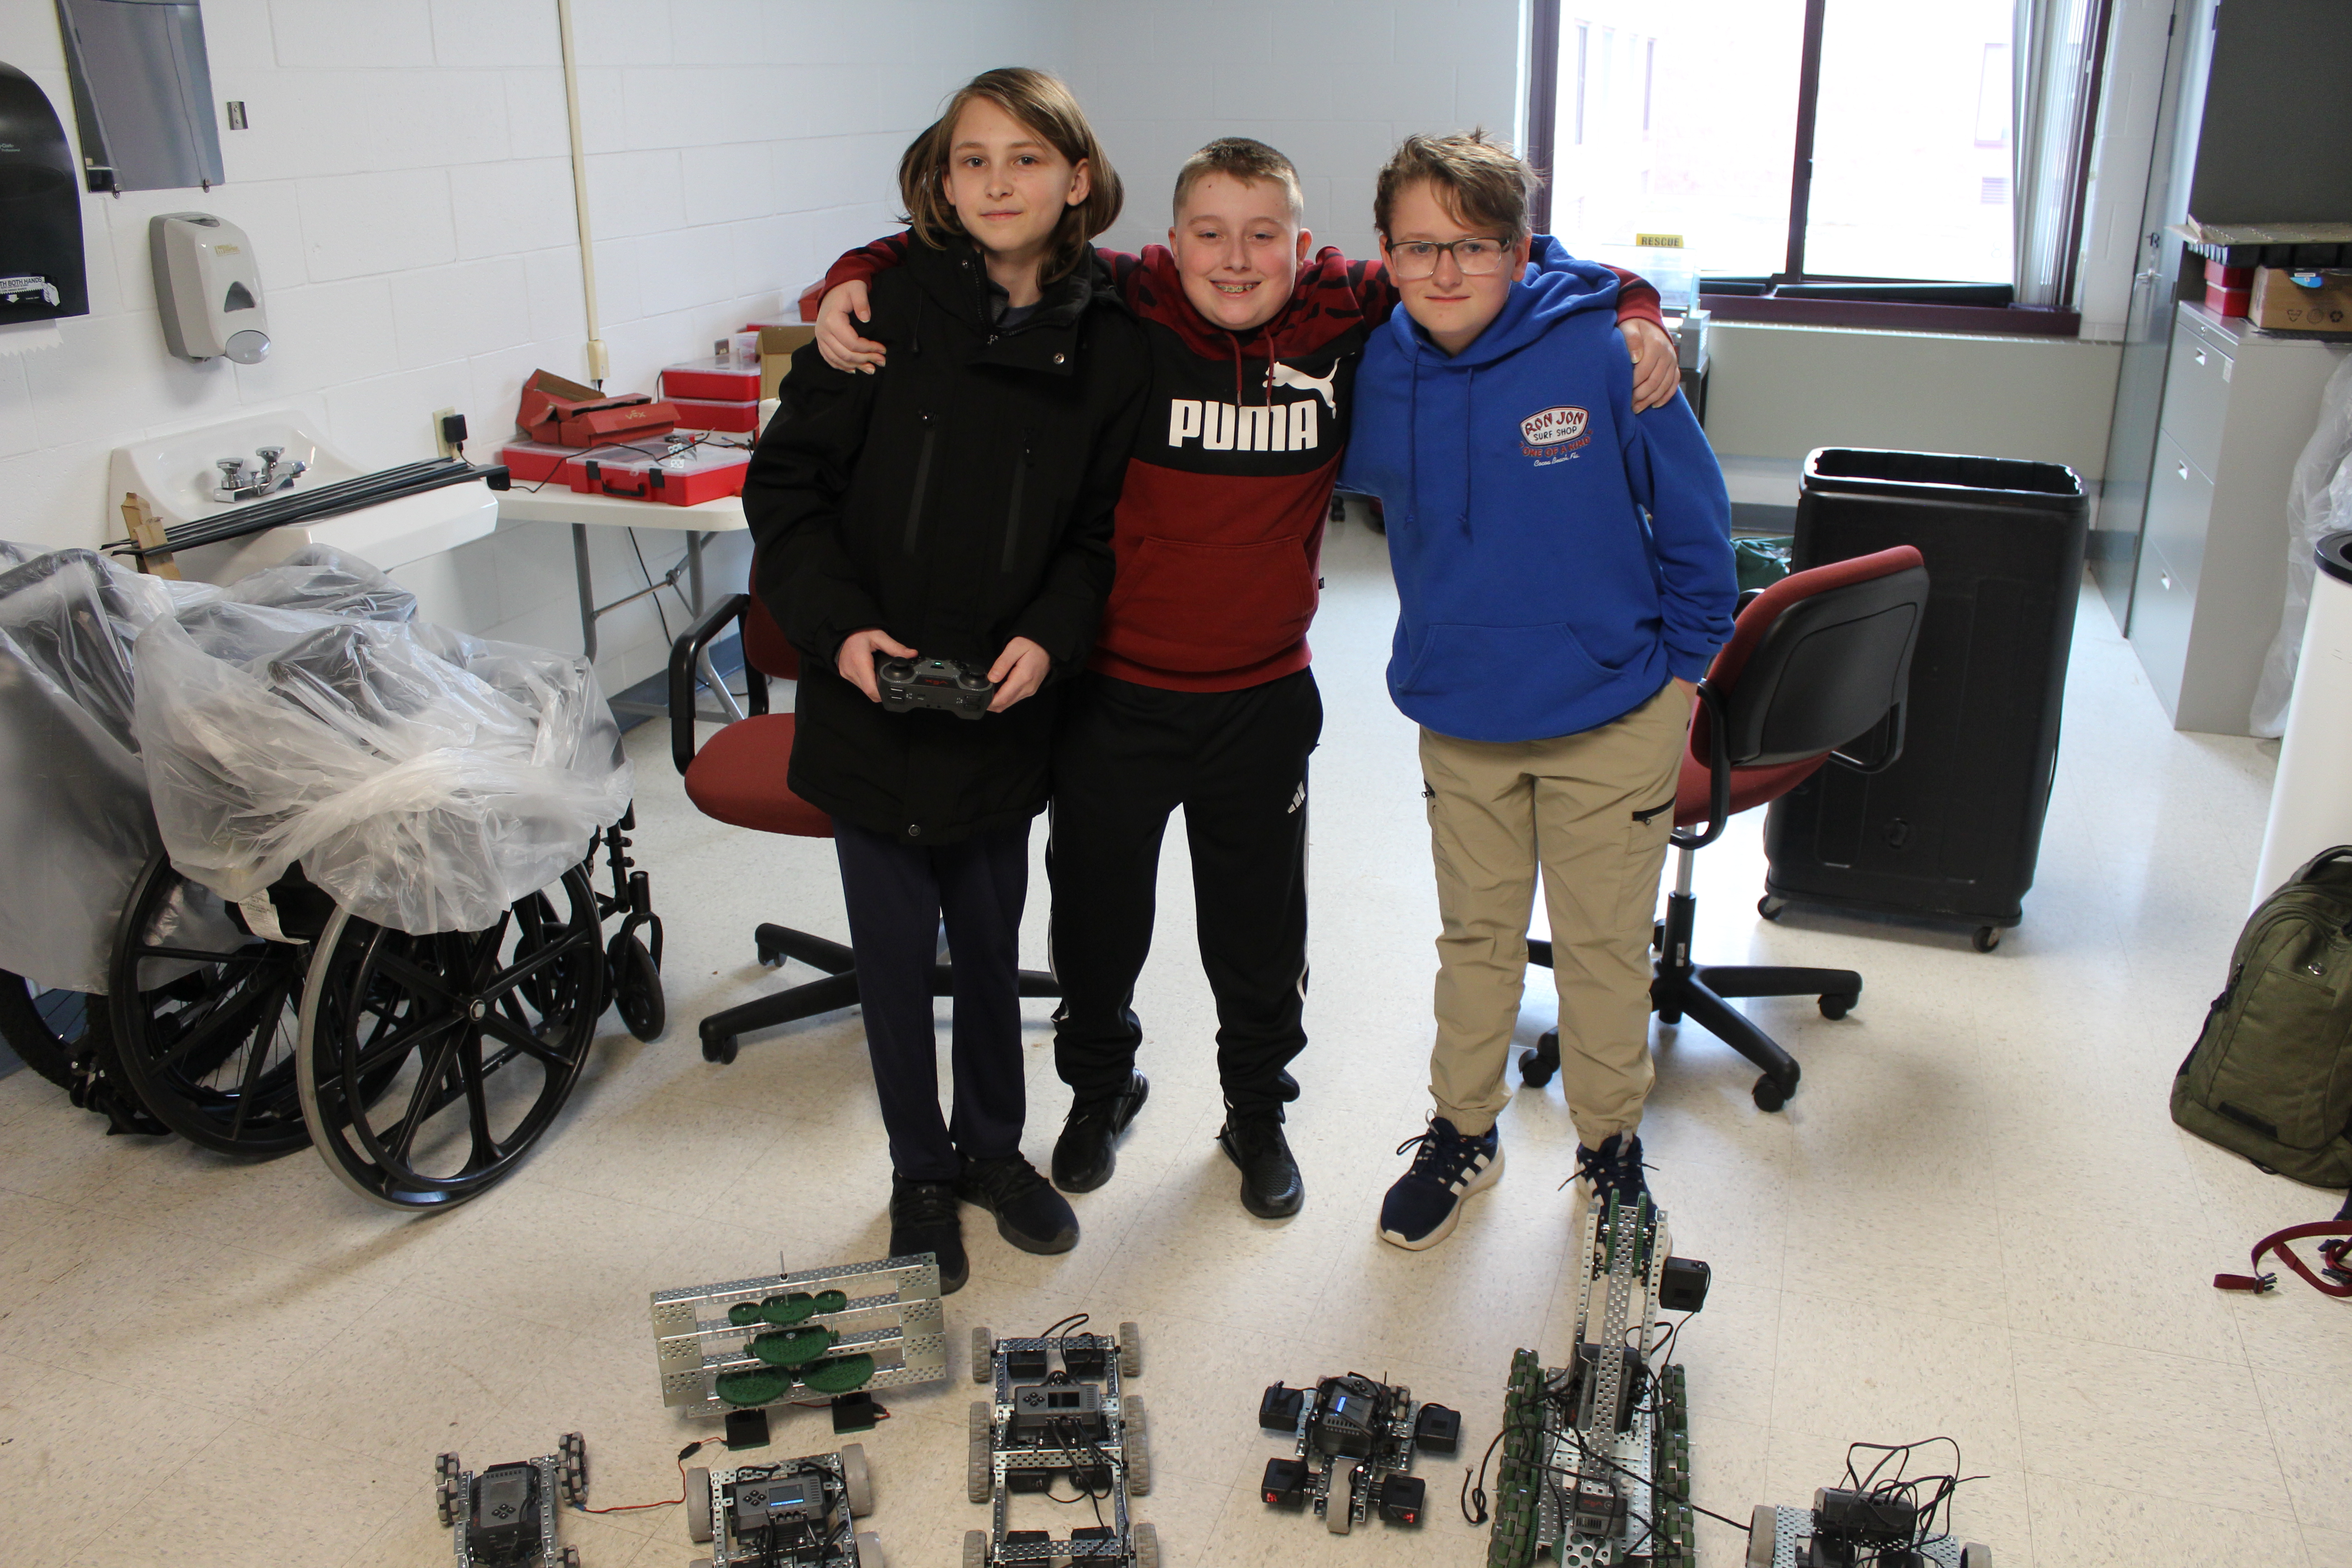 Students in our robotics club